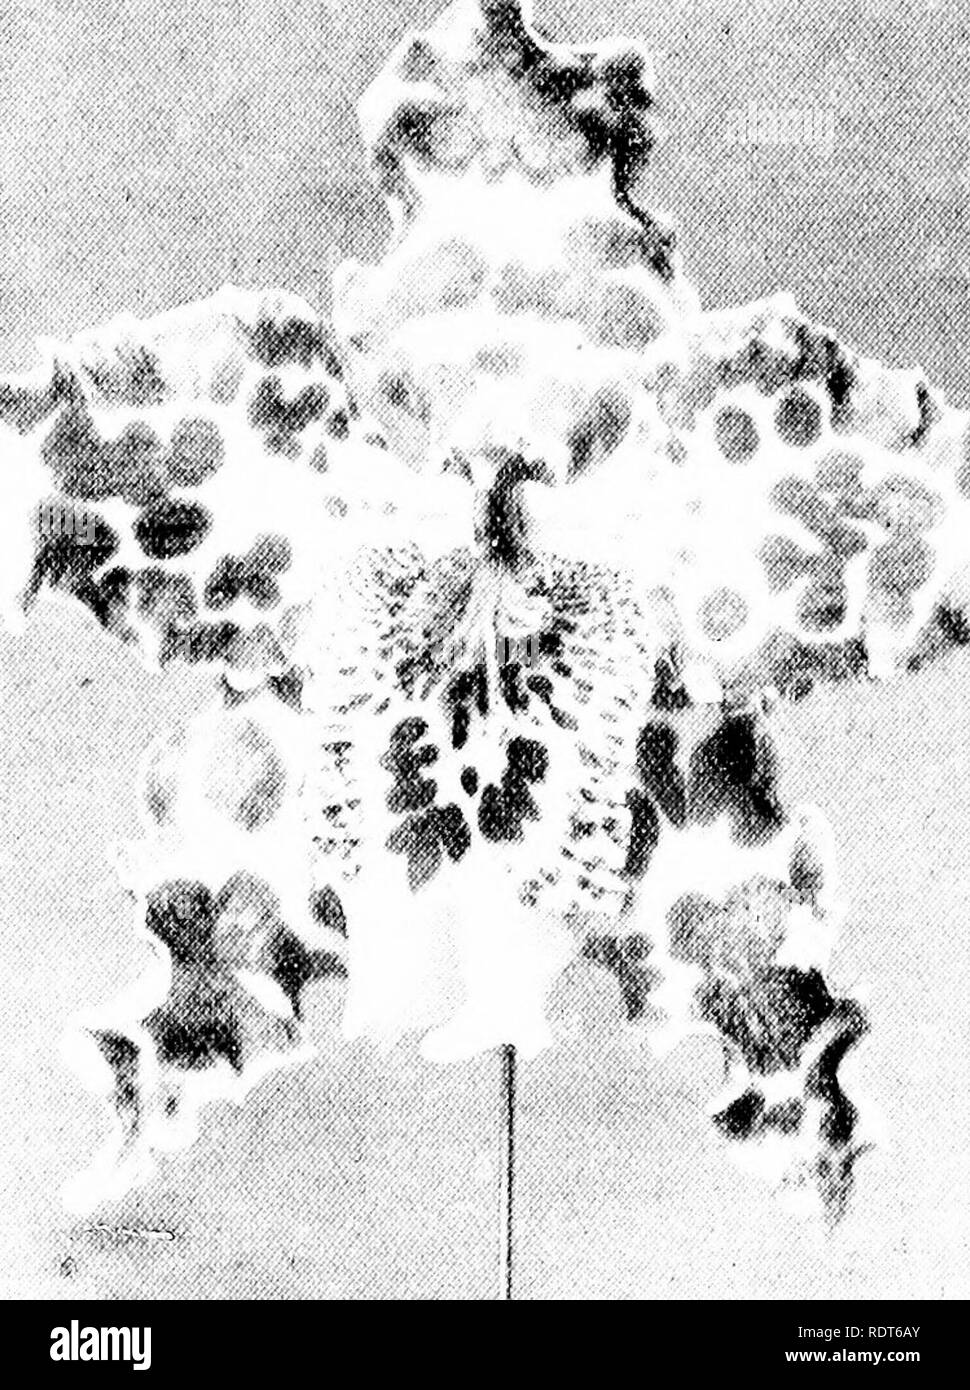 . The orchid stud-book: an enumeration of hybrid orchids of artificial origin, with their parents, raisers, date of first flowering, references to descriptions and figures, and synonymy. With an historical introduction and 120 figures and a chapter on hybridising and raising orchids from seed. Orchids. 288 THE ORCHID STUD-BOOK. [Part II. Sup pi. Hi. 0. X Gladys (cirrhosum x spectabile), G.C. 1906, i. 157; O.R. 1906, 108.âCharlesworth, 1906. Ilk. 0. x Hallio Adrianae (x Adrianae x Hallii), G.C. 1906, i. 110; O.R. 1906, 85.-Charlesworth, 1906. HI. 0. X Halli-xanthum (Hallii x Kegeljani).âCrawsha Stock Photo